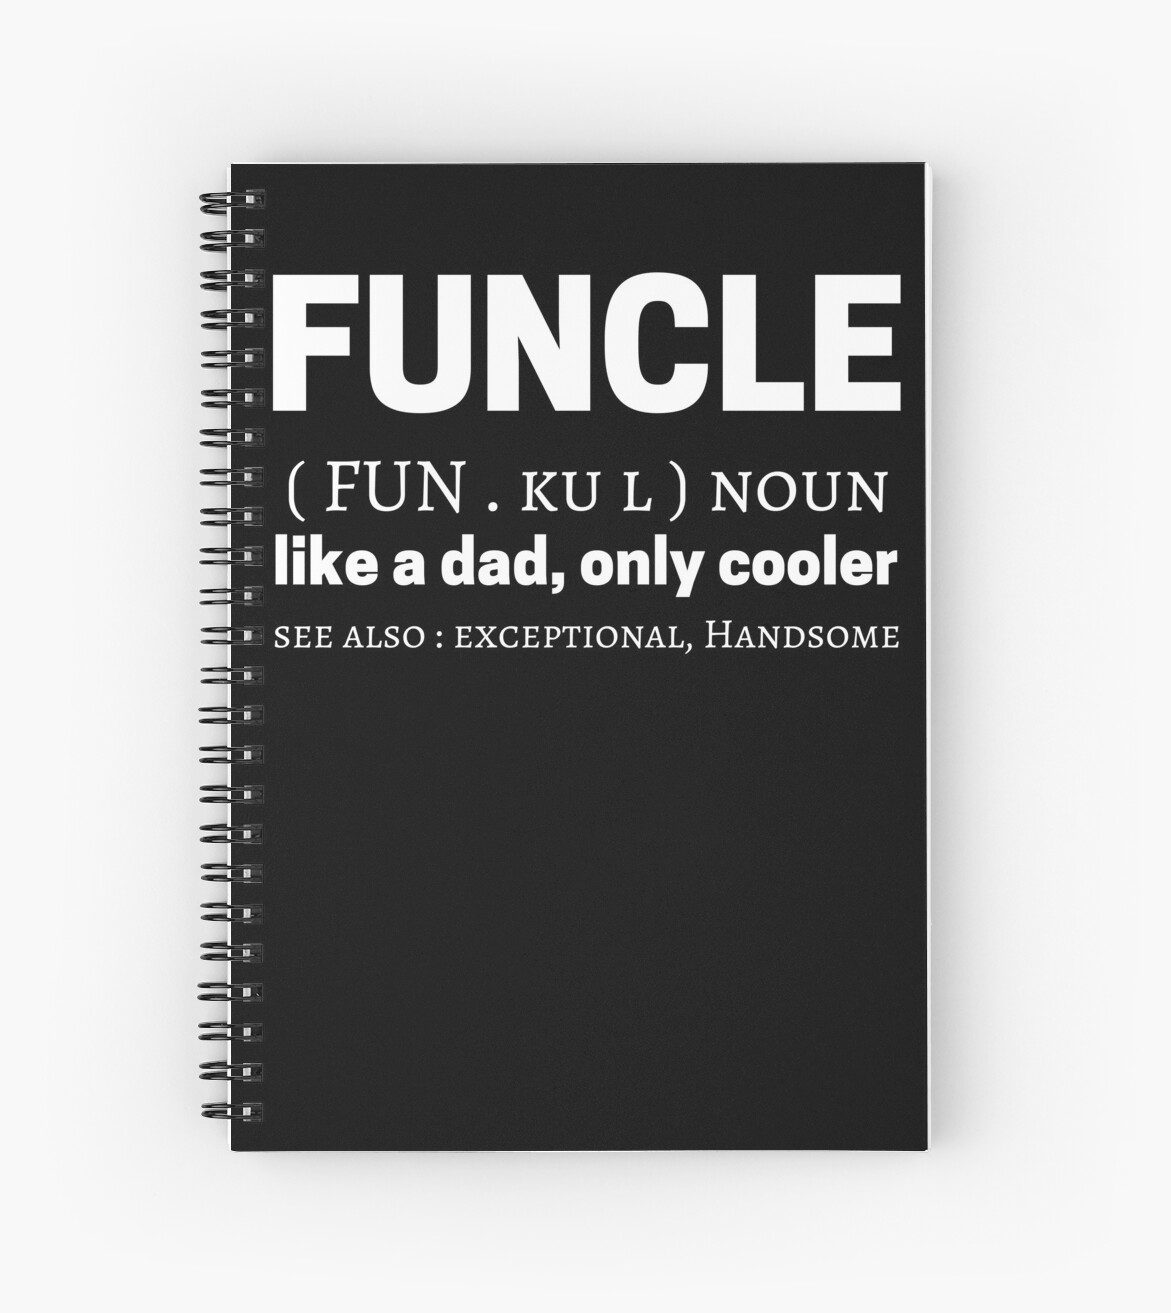 Funcle Meme Quotes Dictionary Definition Meaning Spiral Notebooks